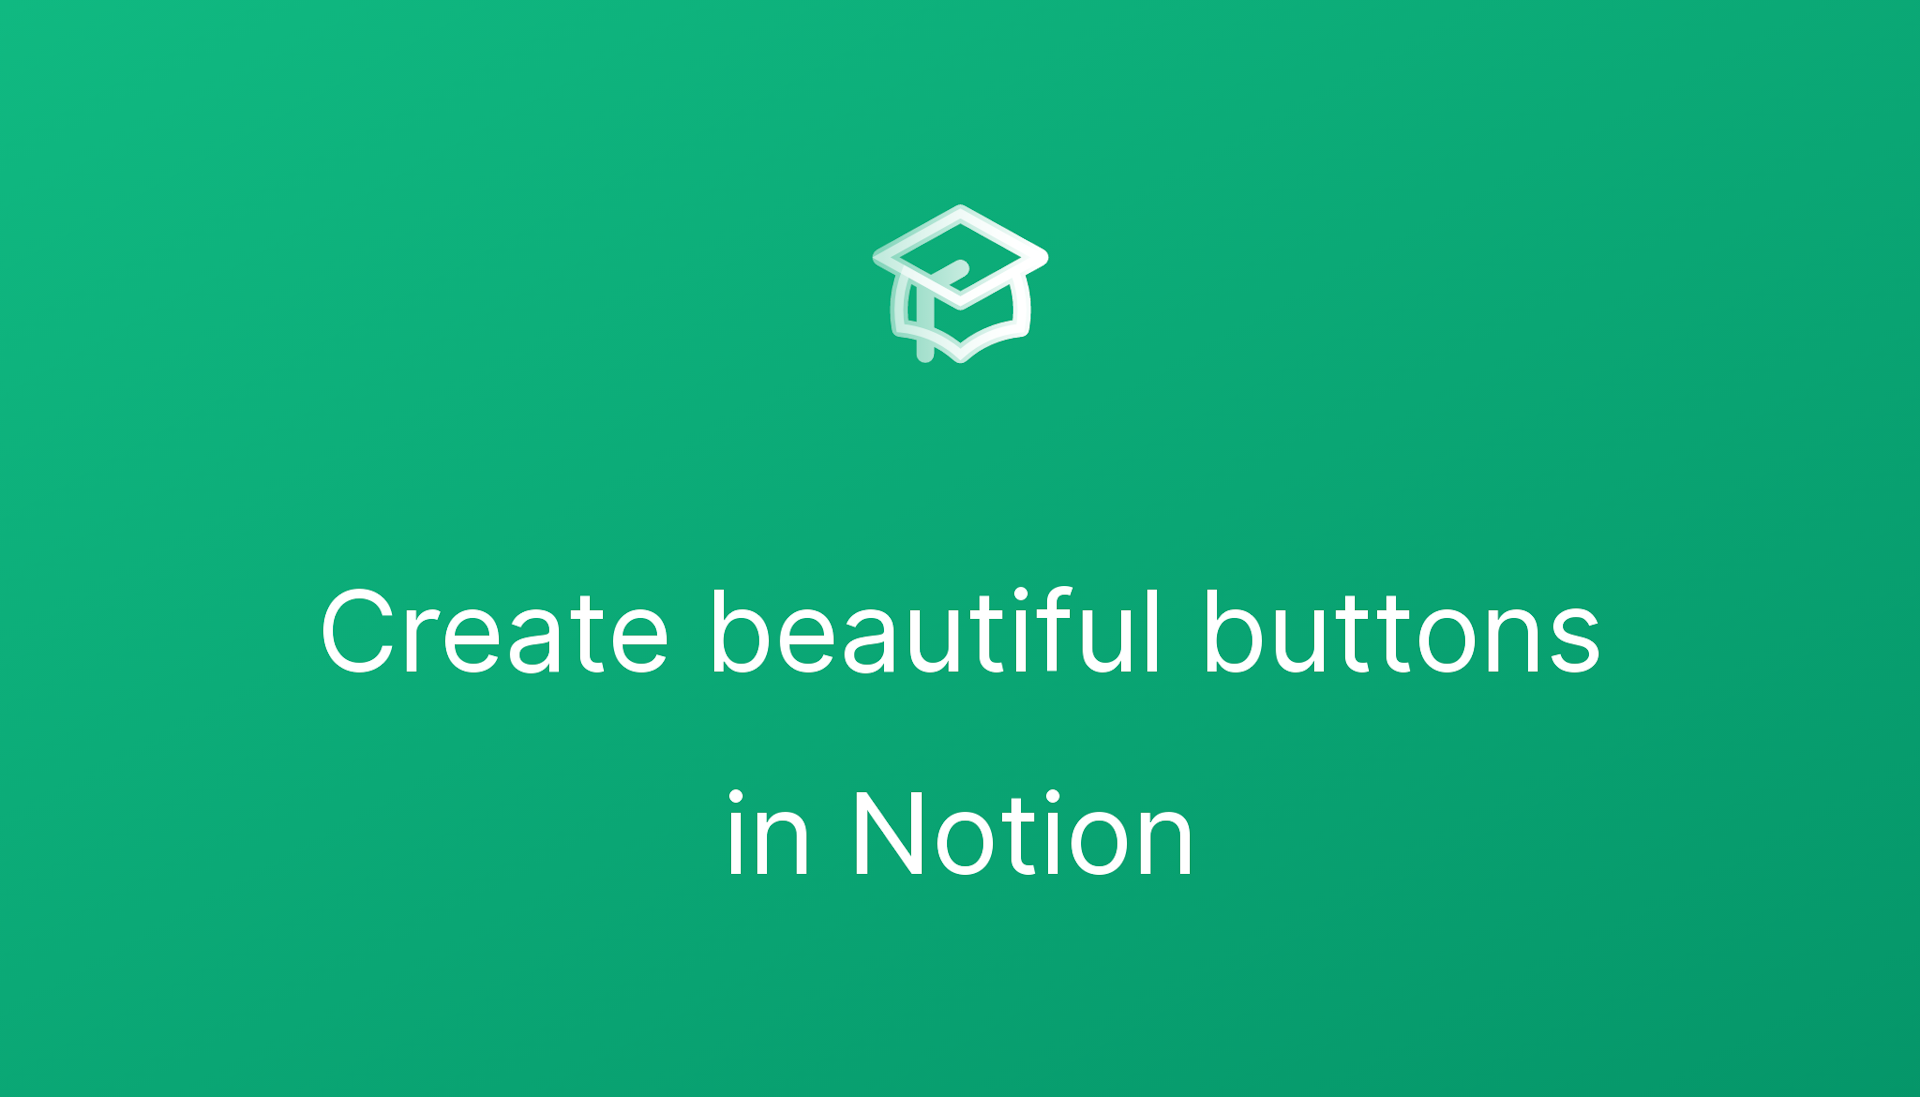 Create beautiful buttons in Notion